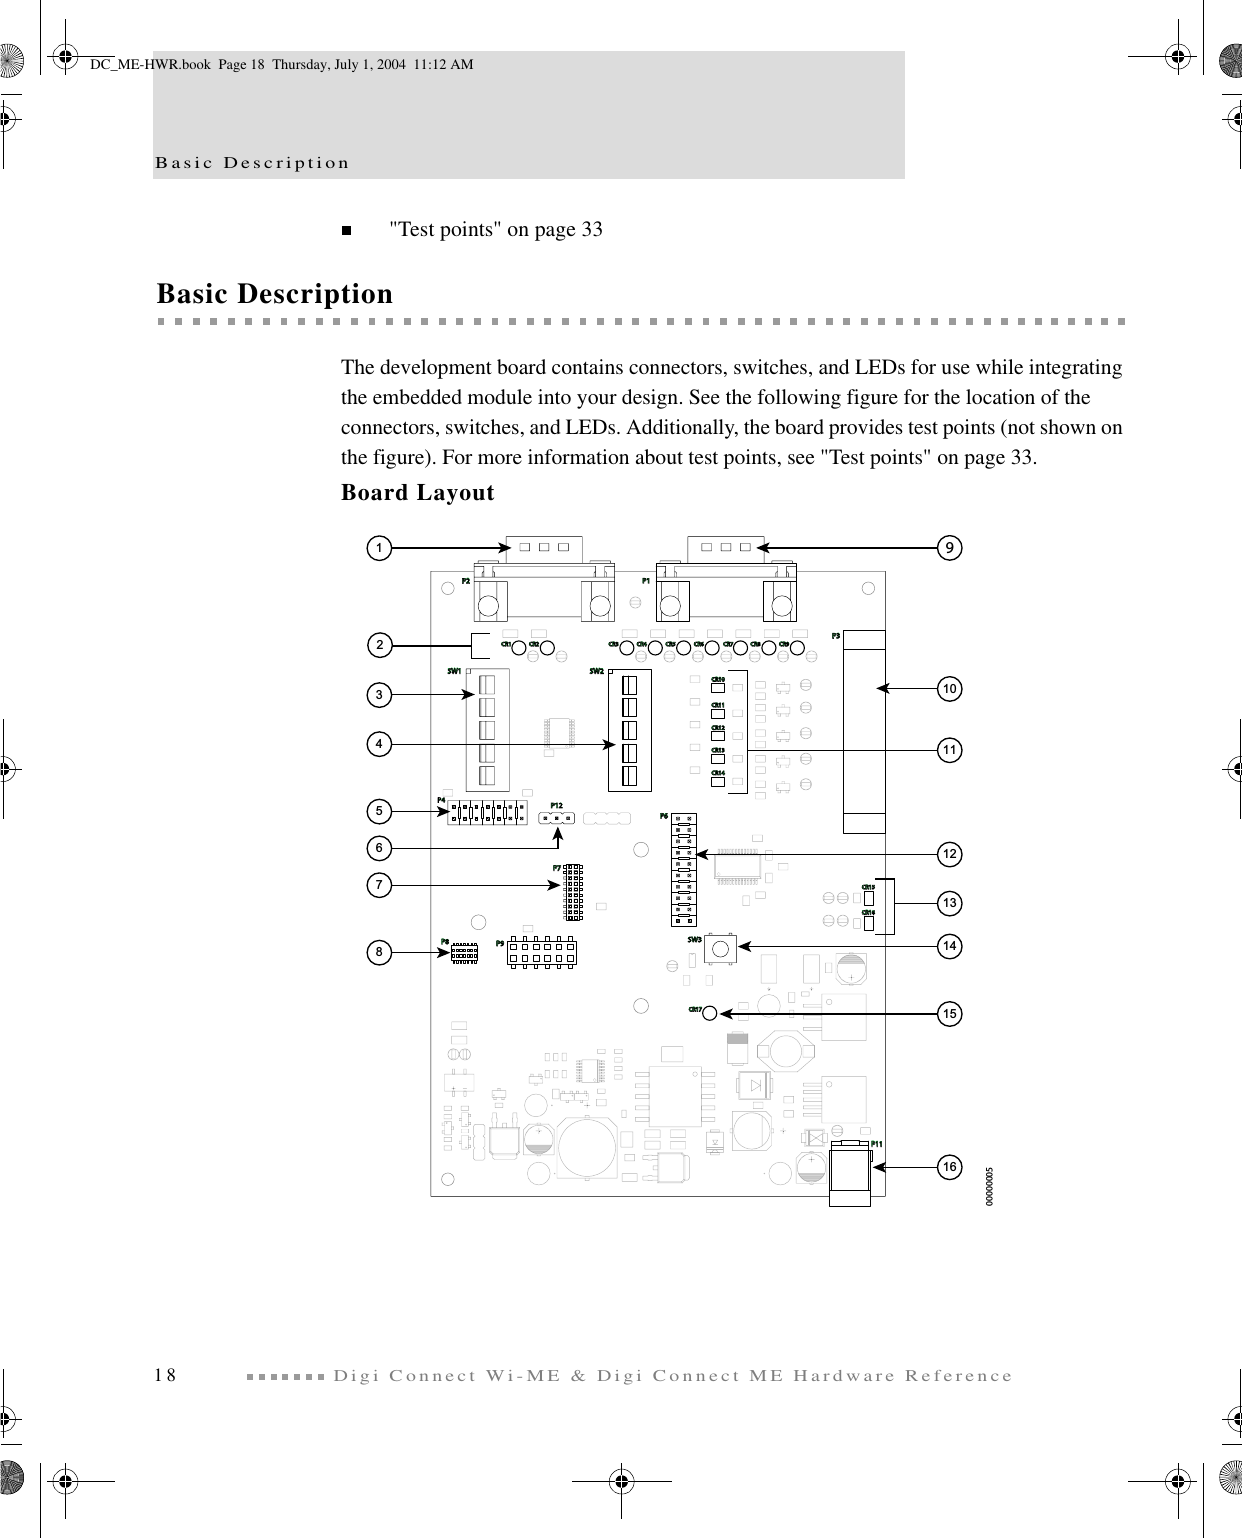 Basic Description18Digi Connect Wi-ME &amp; Digi Connect ME Hardware Reference&quot;Test points&quot; on page 33Basic DescriptionThe development board contains connectors, switches, and LEDs for use while integrating the embedded module into your design. See the following figure for the location of the connectors, switches, and LEDs. Additionally, the board provides test points (not shown on the figure). For more information about test points, see &quot;Test points&quot; on page 33. Board Layout00000005P8P8P11P11P4CR2CR2P3P3CR16CR16CR6CR6CR15CR15P6P6SW2SW2P9P9SW3SW3CR4CR4CR9CR9CR5CR5CR1CR1P7P7P2P2SW1SW1P1P1CR8CR8CR7CR7CR11CR11CR10CR10CR13CR13CR12CR12CR14CR14CR3CR3CR17CR171234567810111213141516P12P129DC_ME-HWR.book  Page 18  Thursday, July 1, 2004  11:12 AM